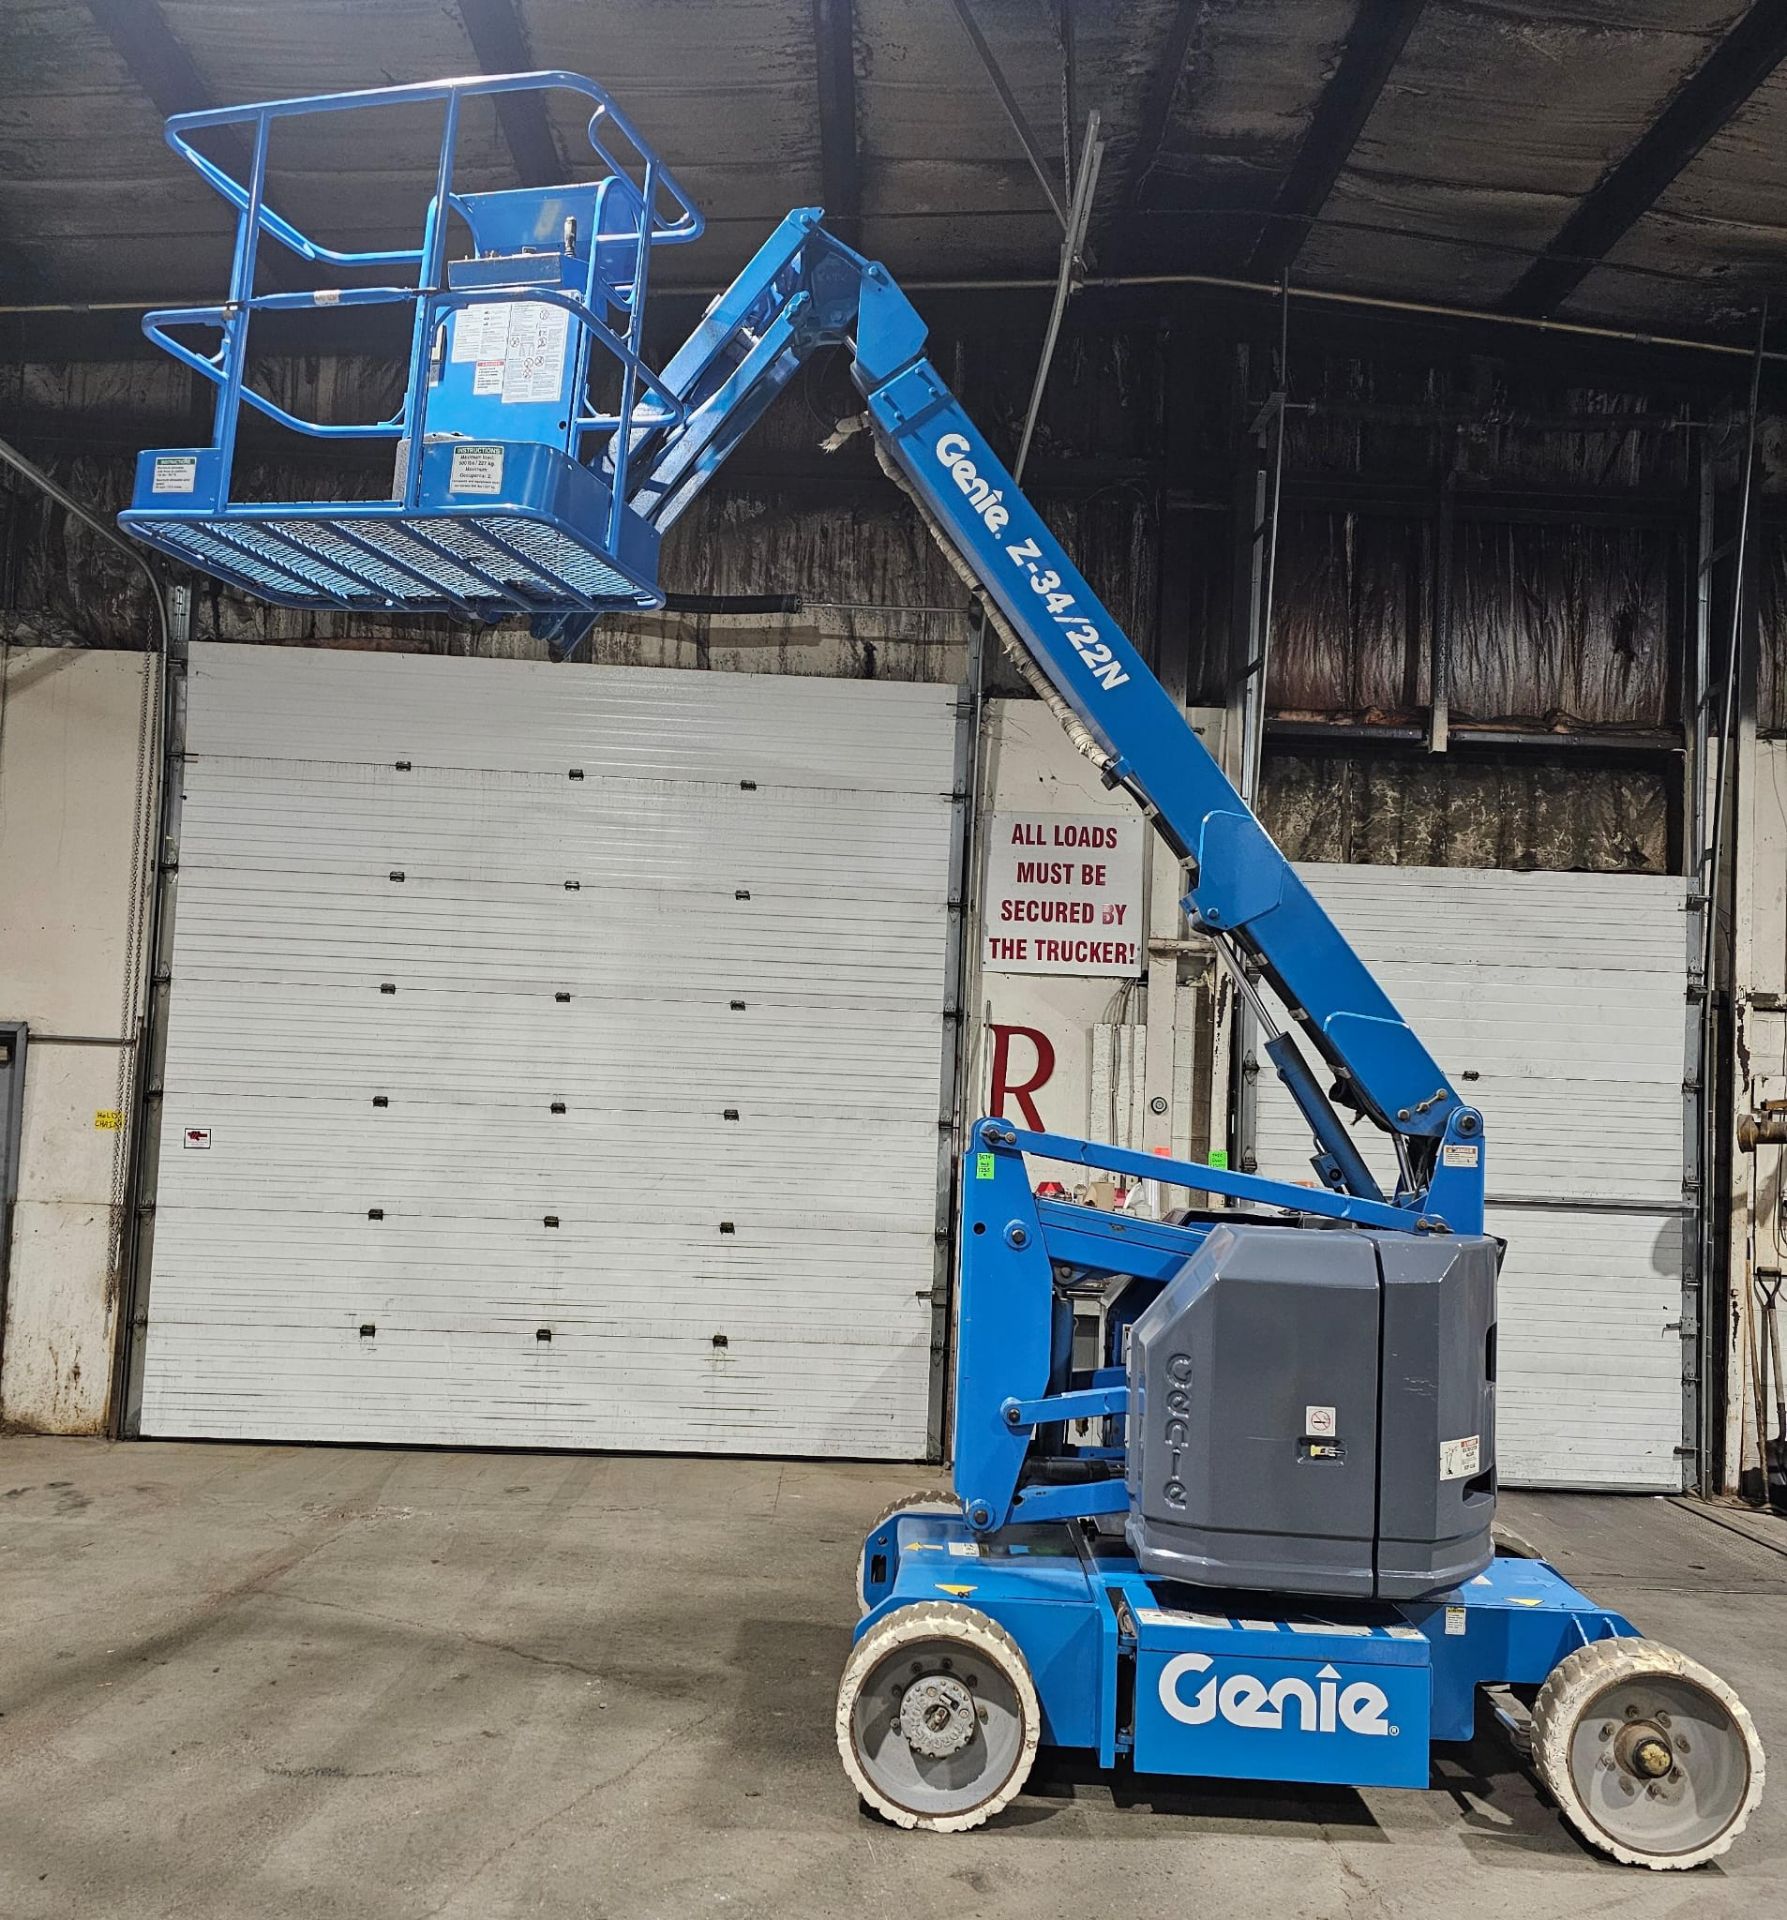 Genie Boom Lift Model Z34N 500lbs 2 person Capacity INDOOR/OUTDOOR Electric 48V 34 ft platform - Image 3 of 10